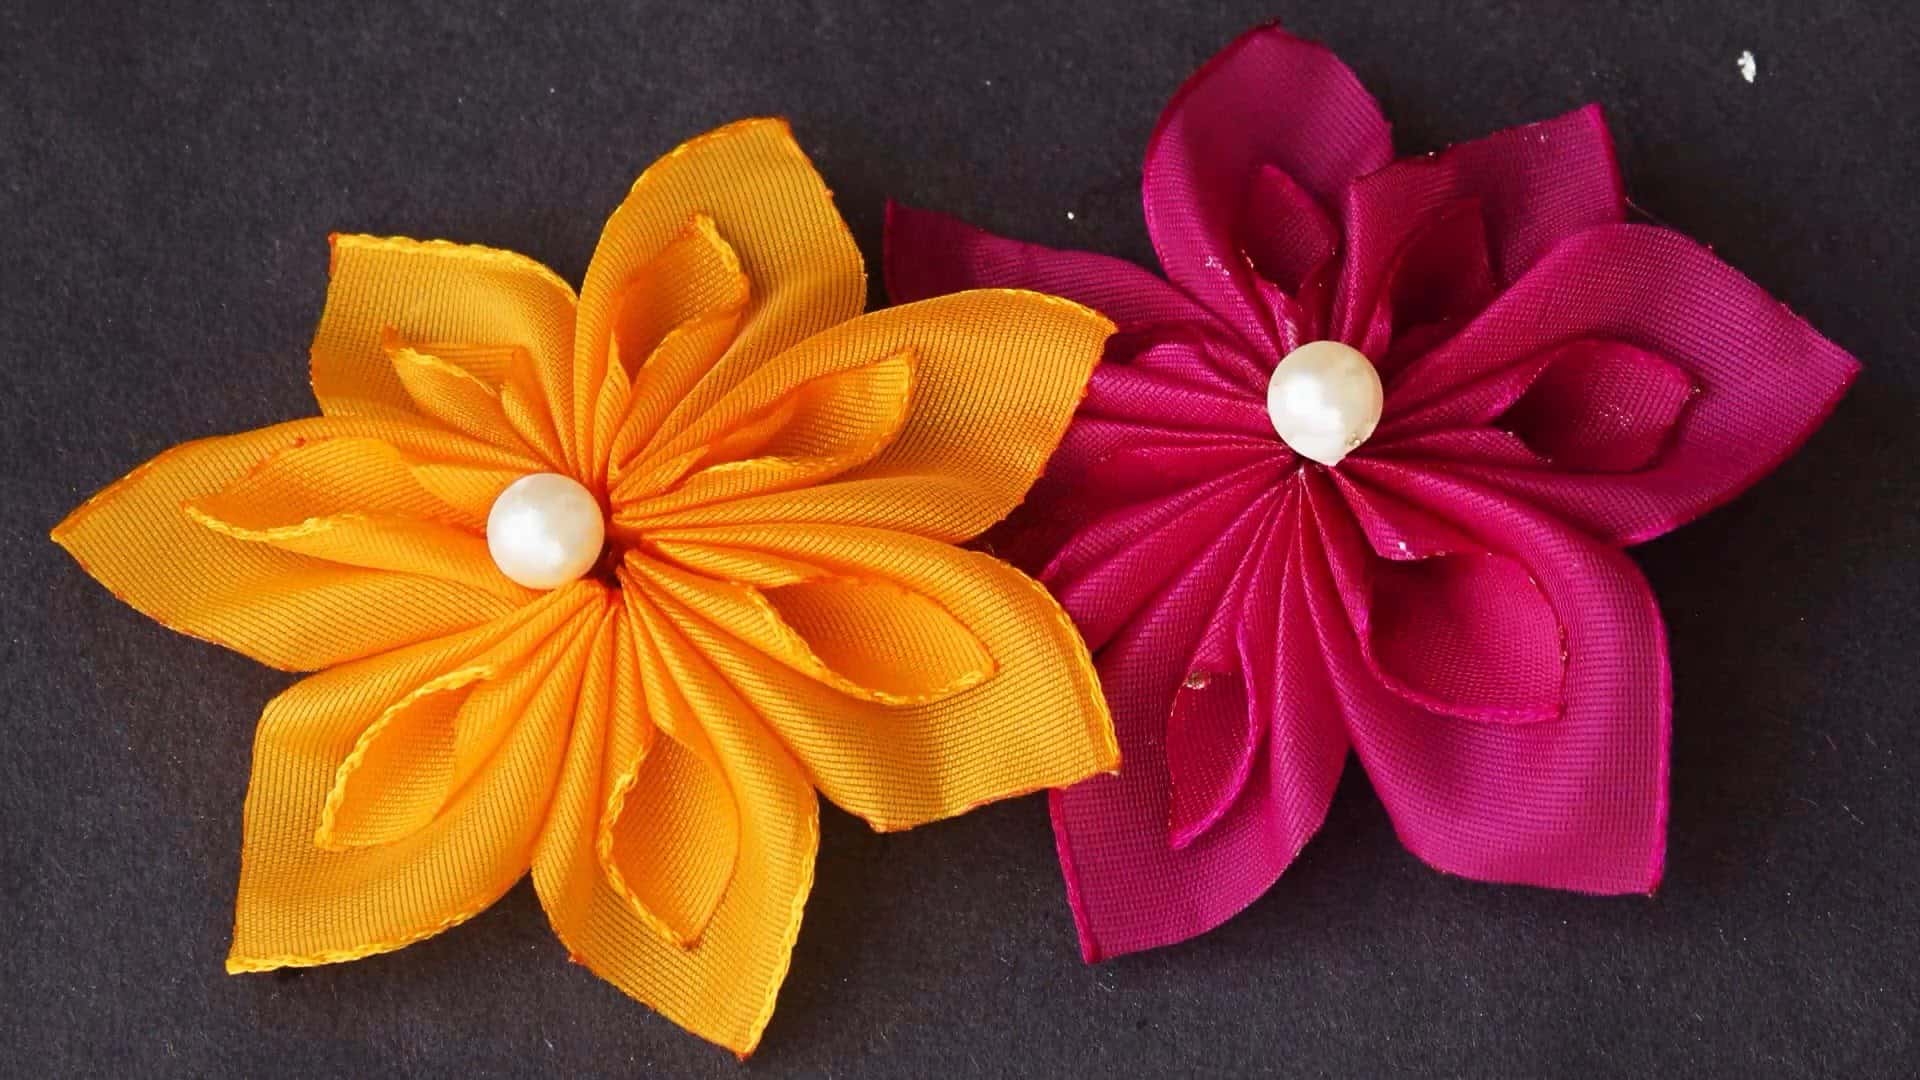 Celebrate Color: 13 Lovely Things to Make With Ribbons!